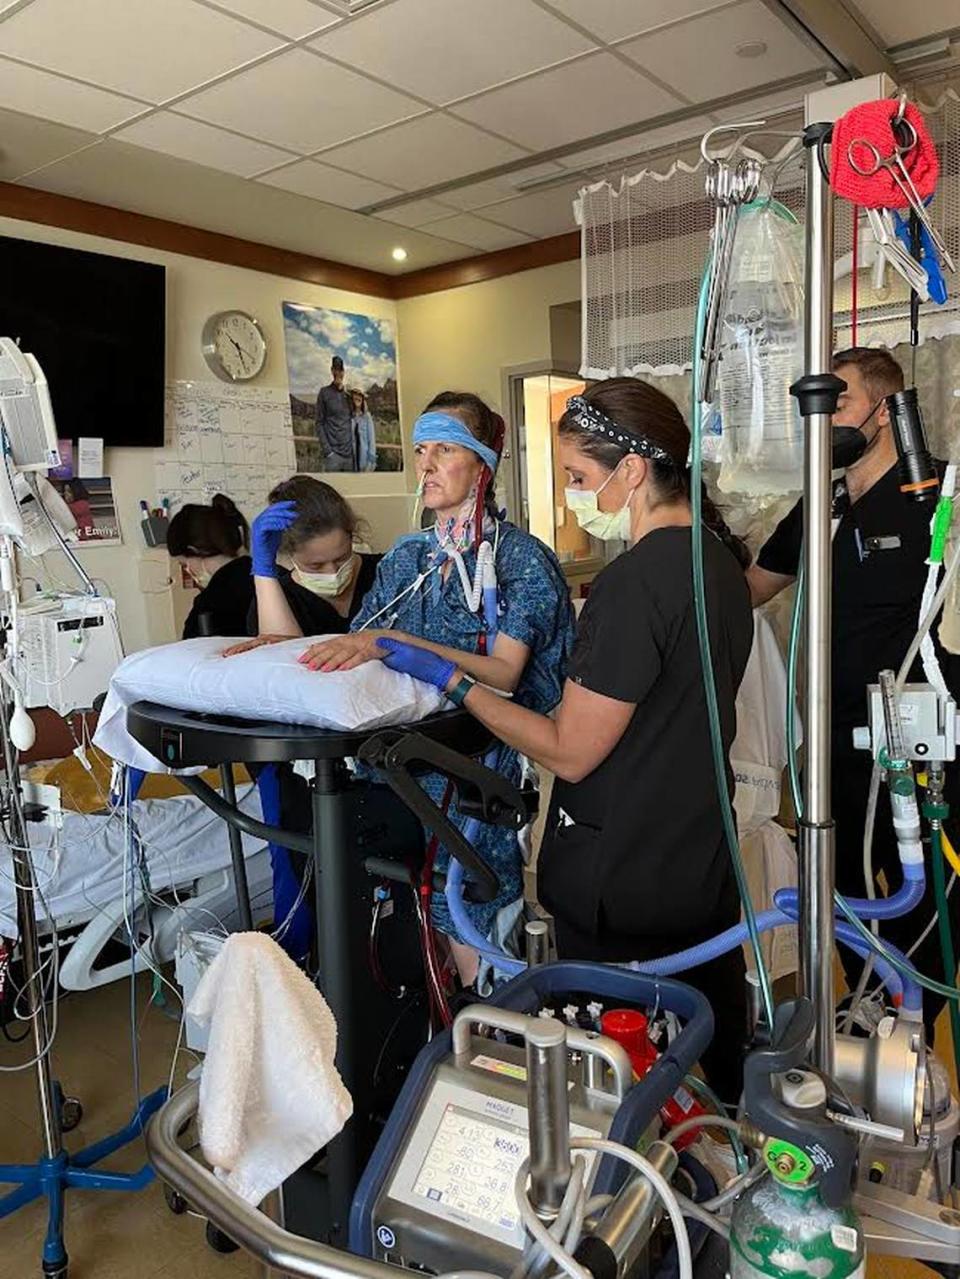 Lexington teacher Emily Presley has been attached to a life-saving ECMO machine for 18 weeks after a bacterial infection ravaged her lungs.